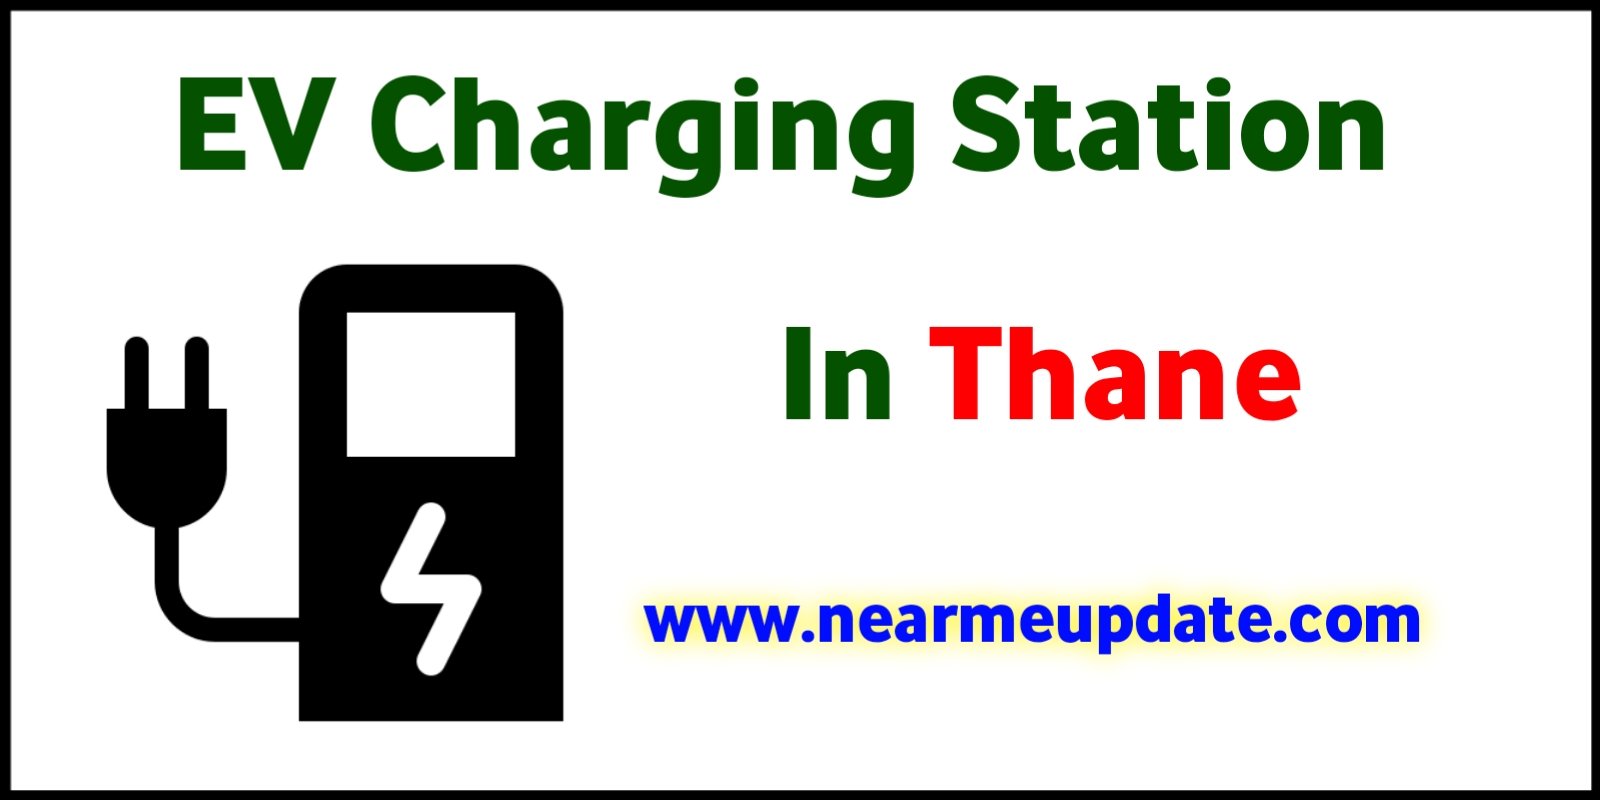 EV Charging Station In Thane